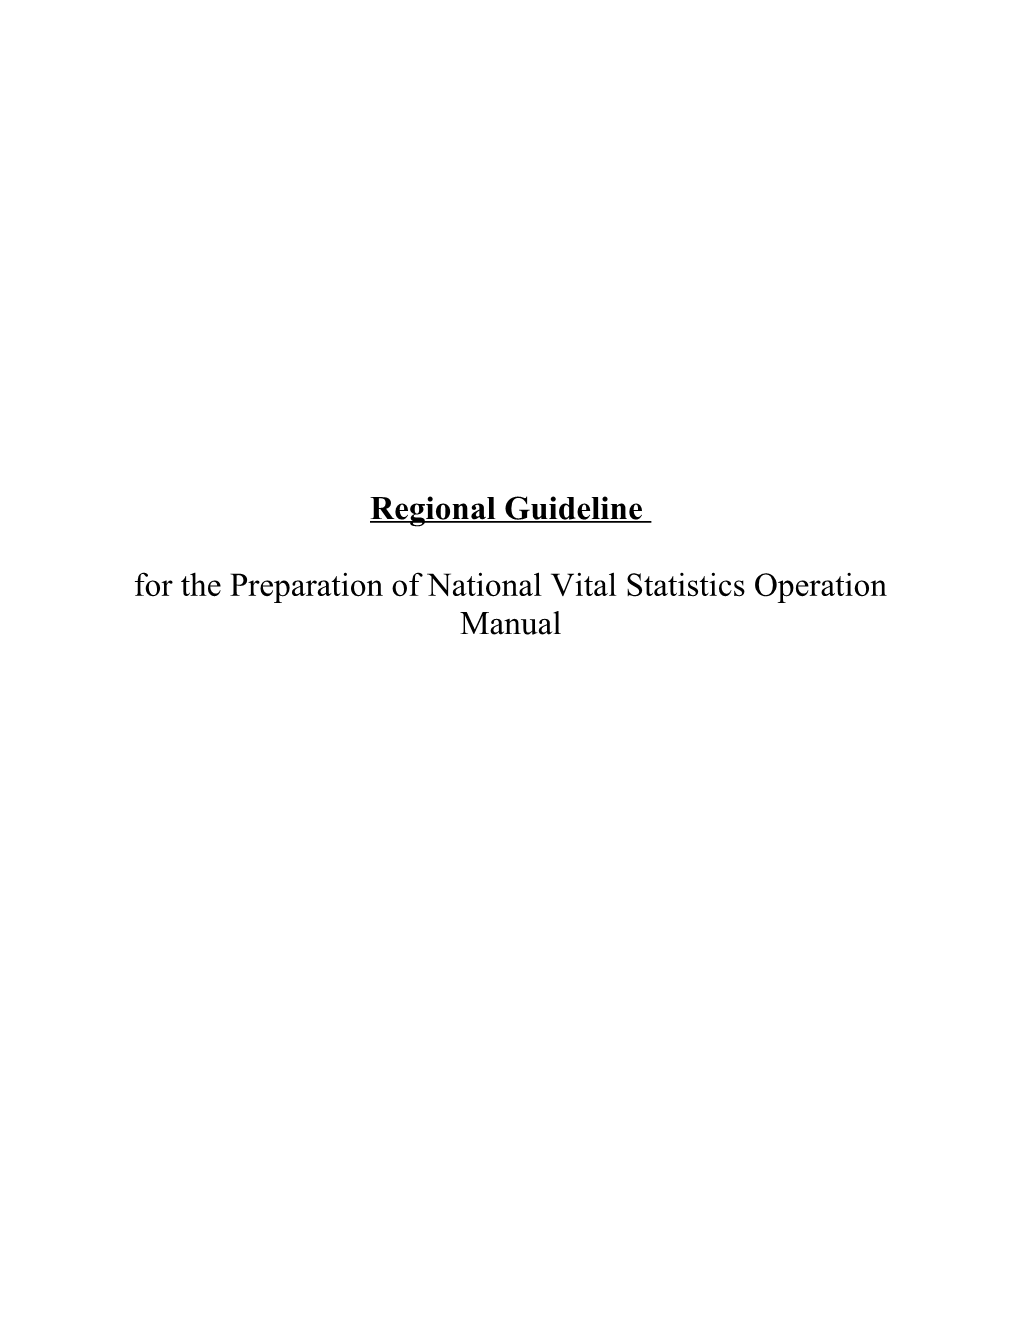 Regional Guideline for the Preparation of National Vital Statistics Operation Manual